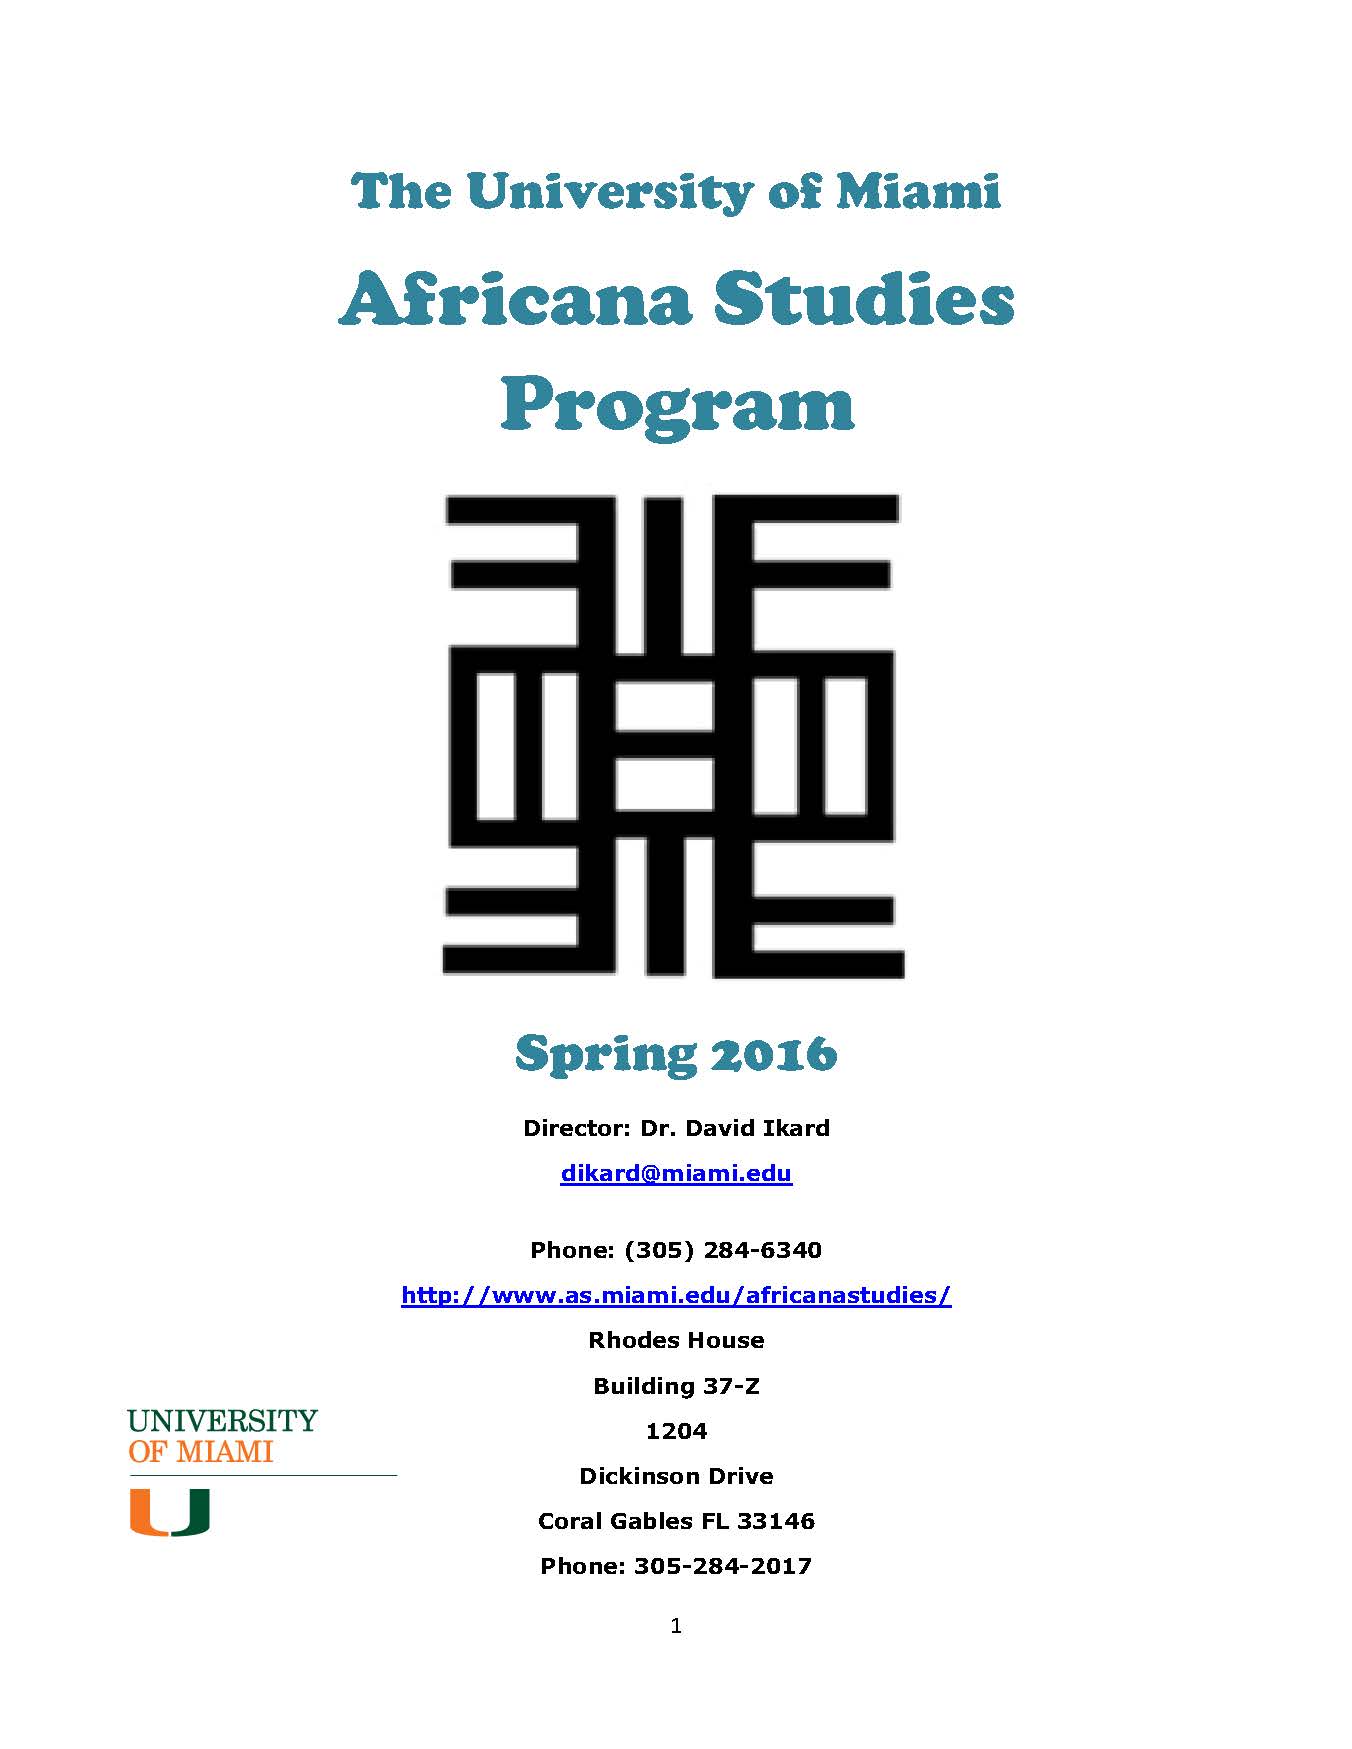 AAS Spring 2016 Course Booklet